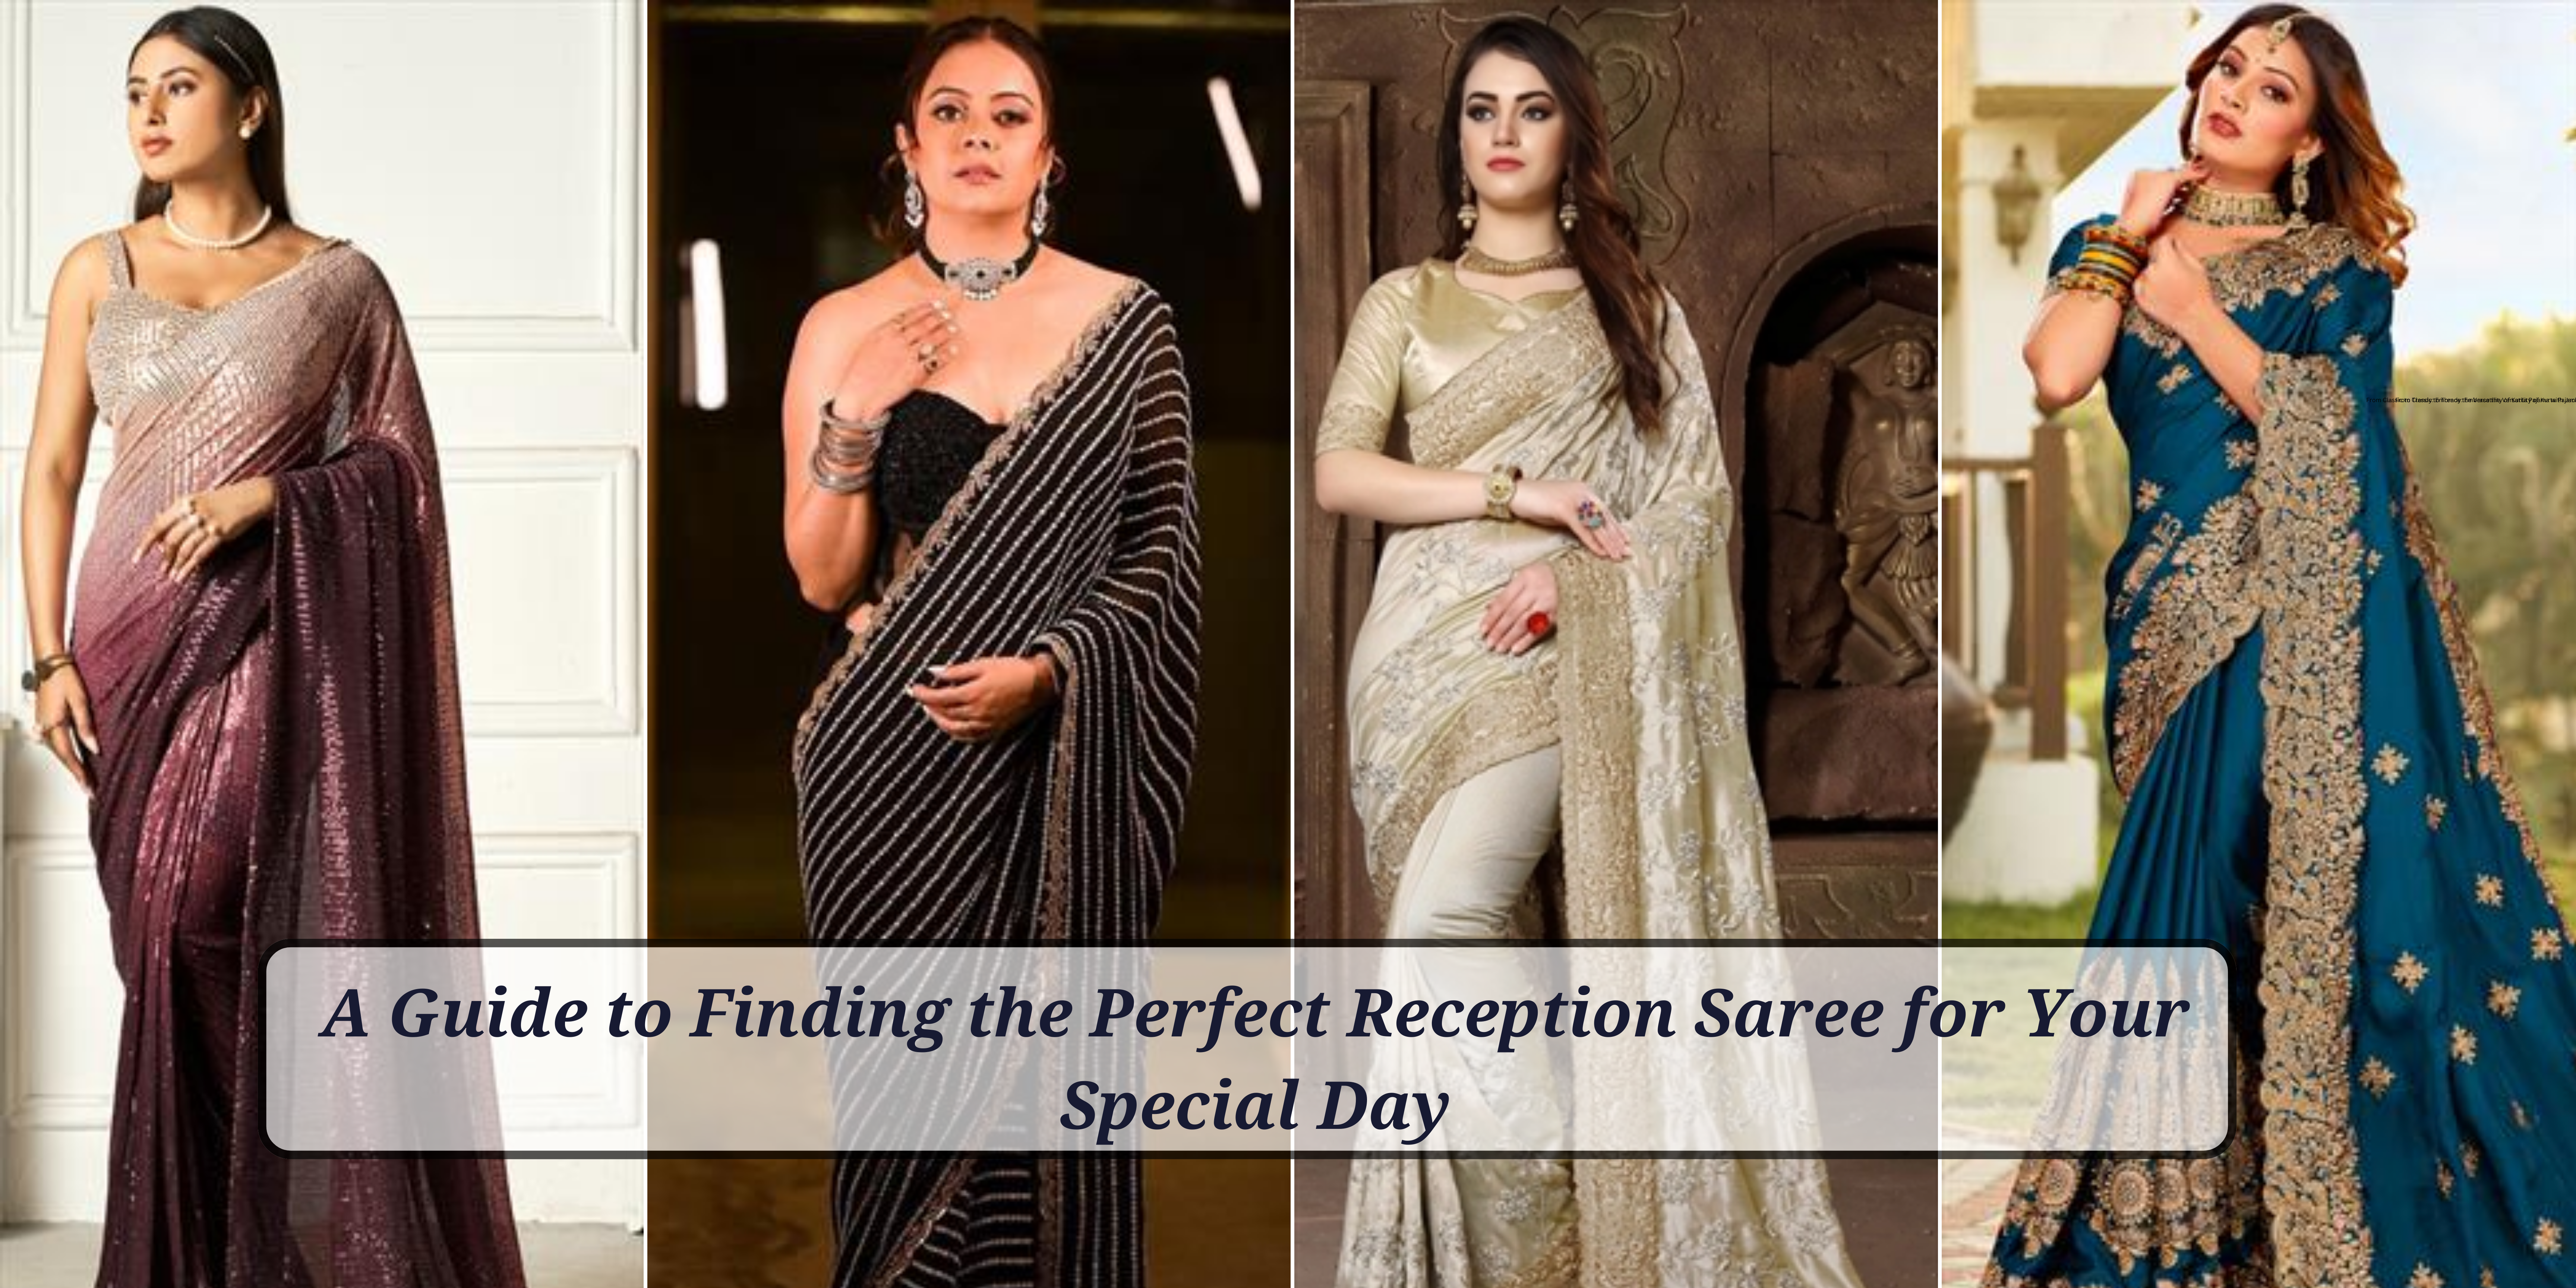 A Guide to Finding the Perfect Reception Saree for Your Special Day